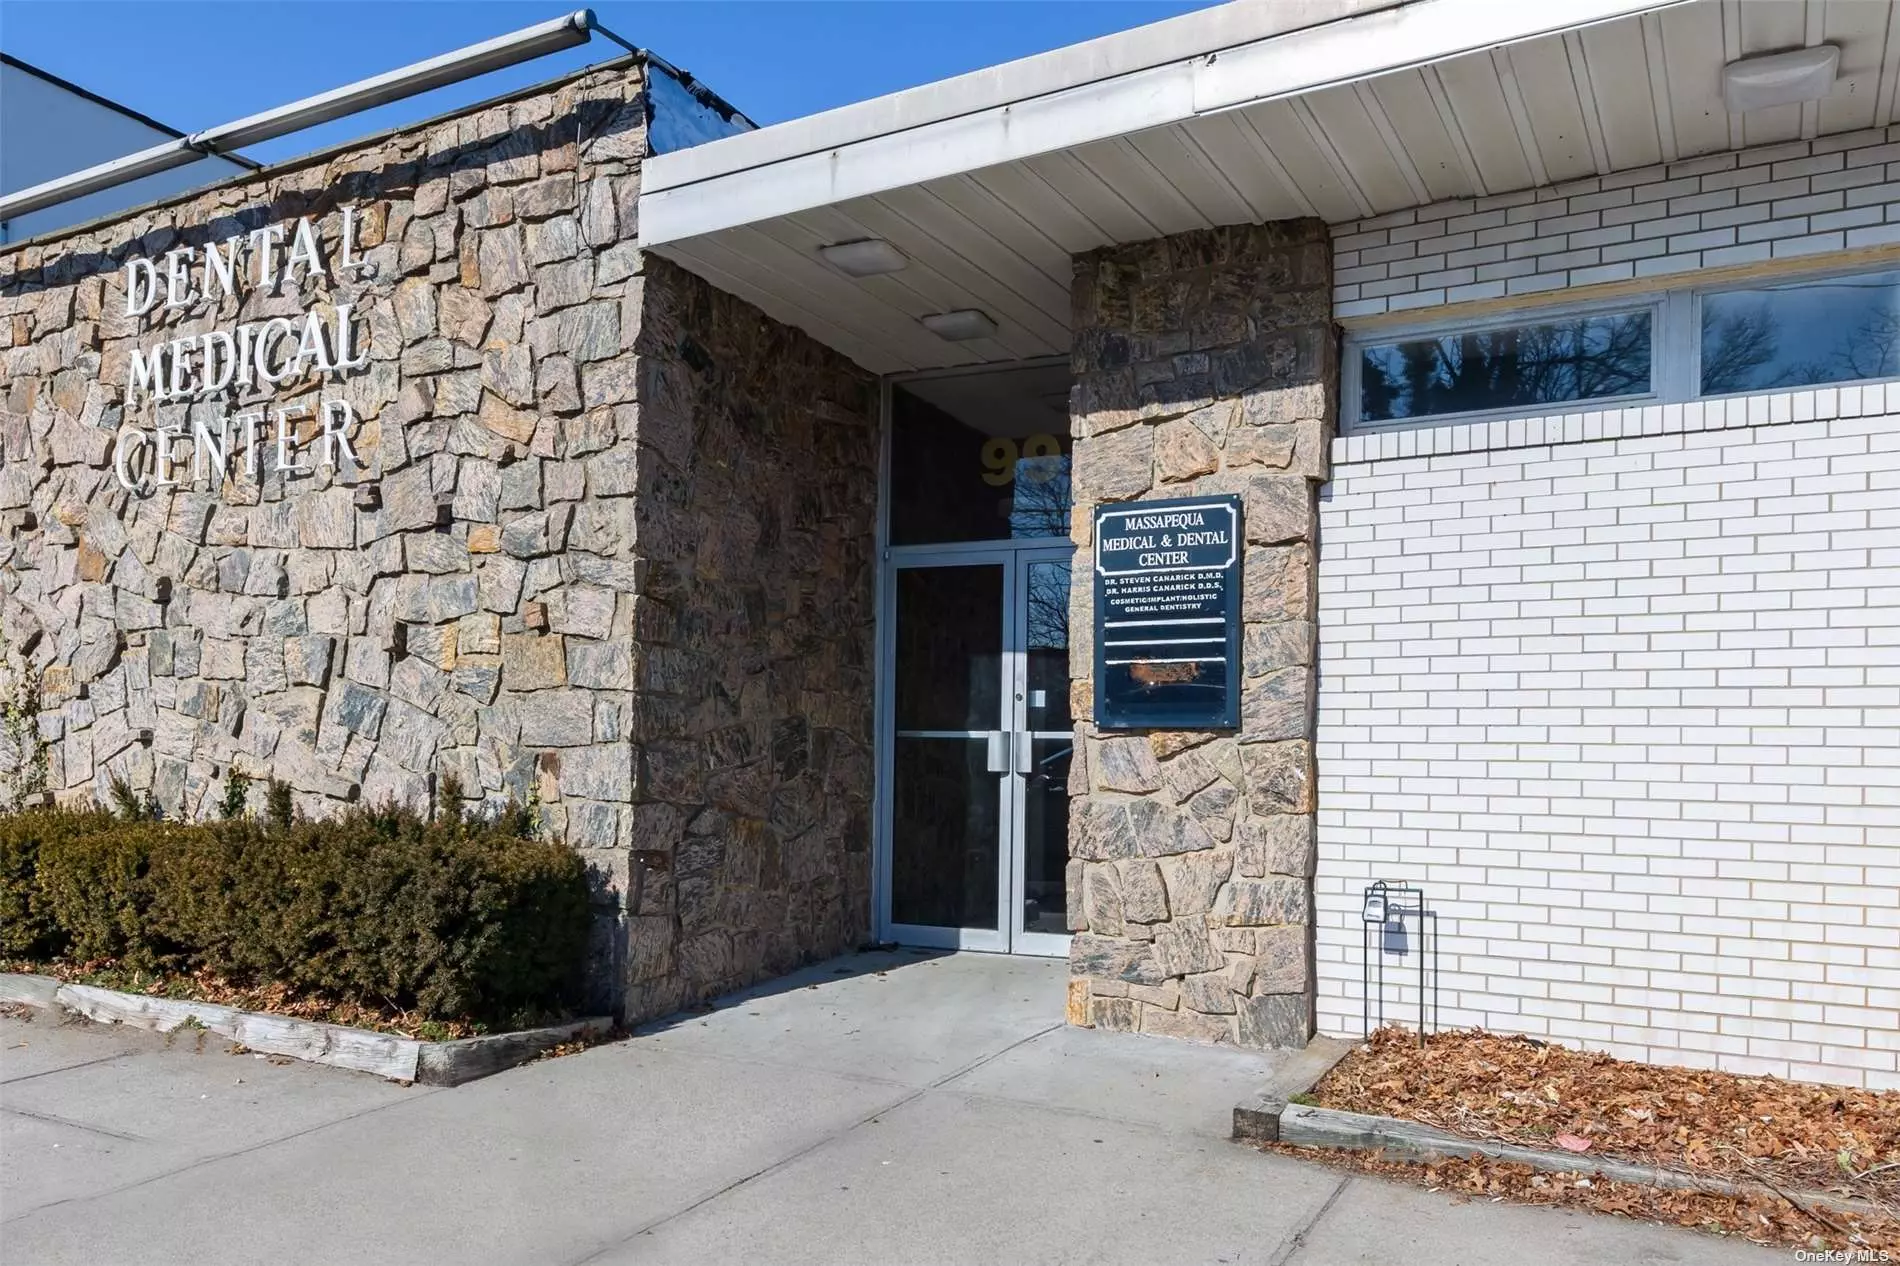 Large Stand Alone Medical Building(5187 SQFT) Located In A Busy Location 1/2 Block From LIRR, Across The Street From A Municipal Parking Lot. Rare Find, Perfect For Any Medical/Professional Office Use! Current Owner Occupies 1, 650sqft (Dental Office)